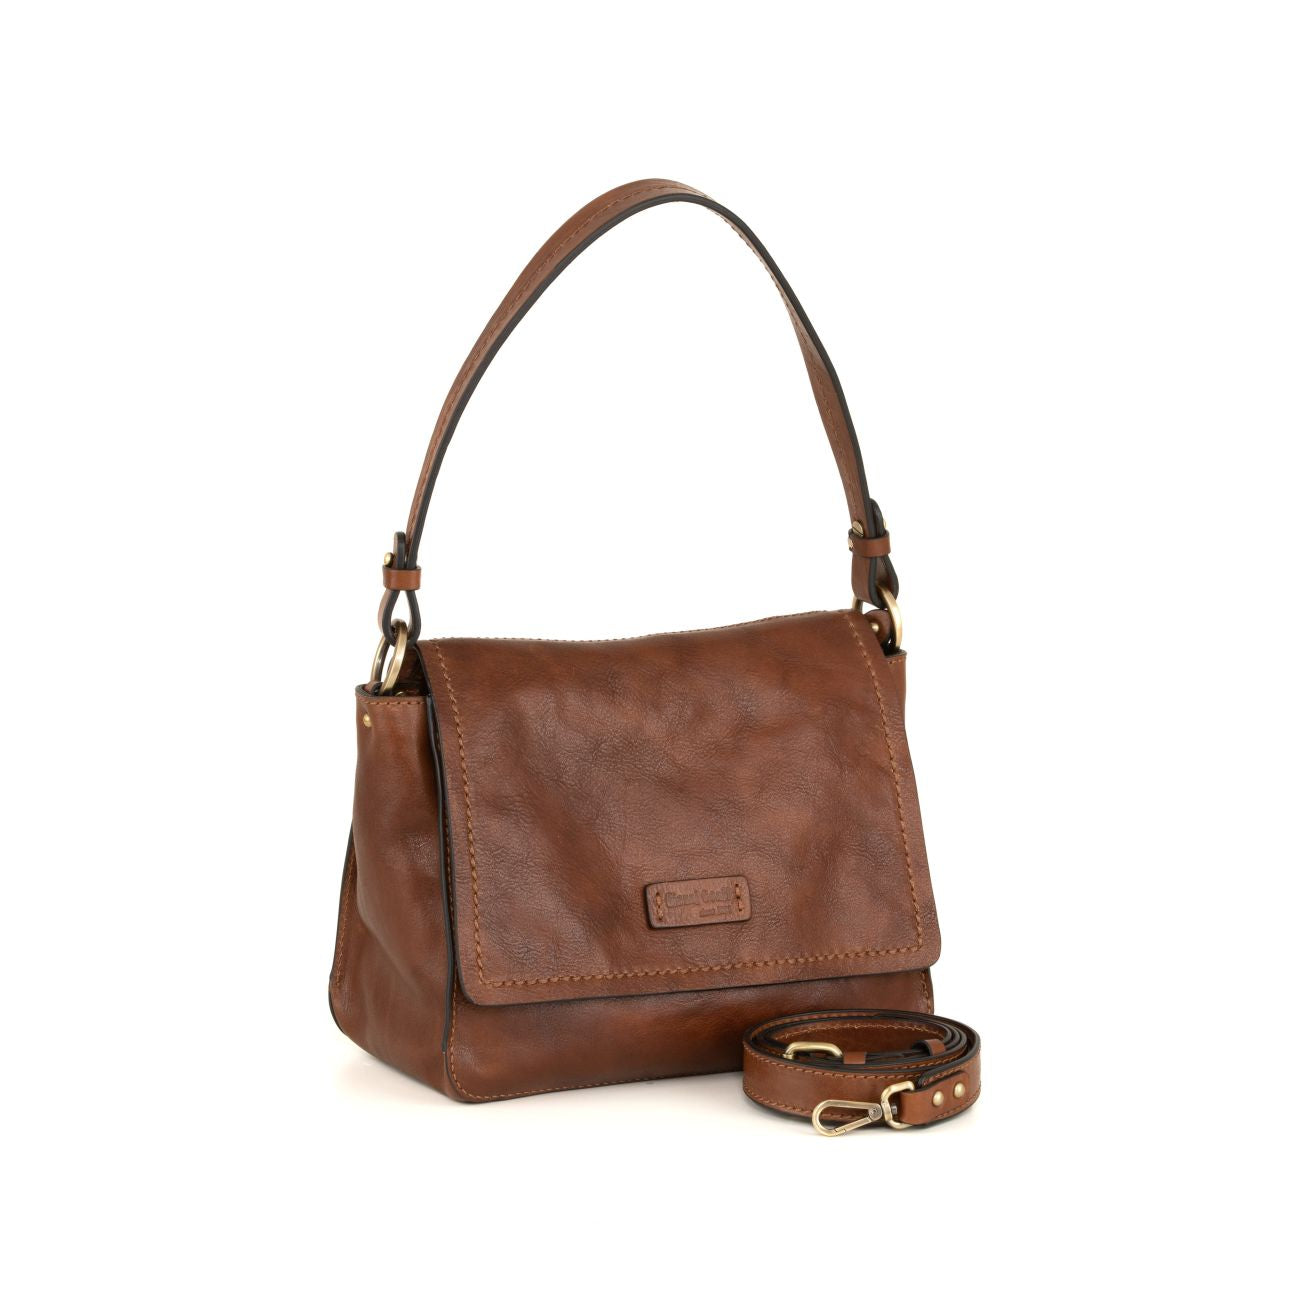 Annalisa Vegetable-Tanned Leather Shoulder Bag by Gianni Conti